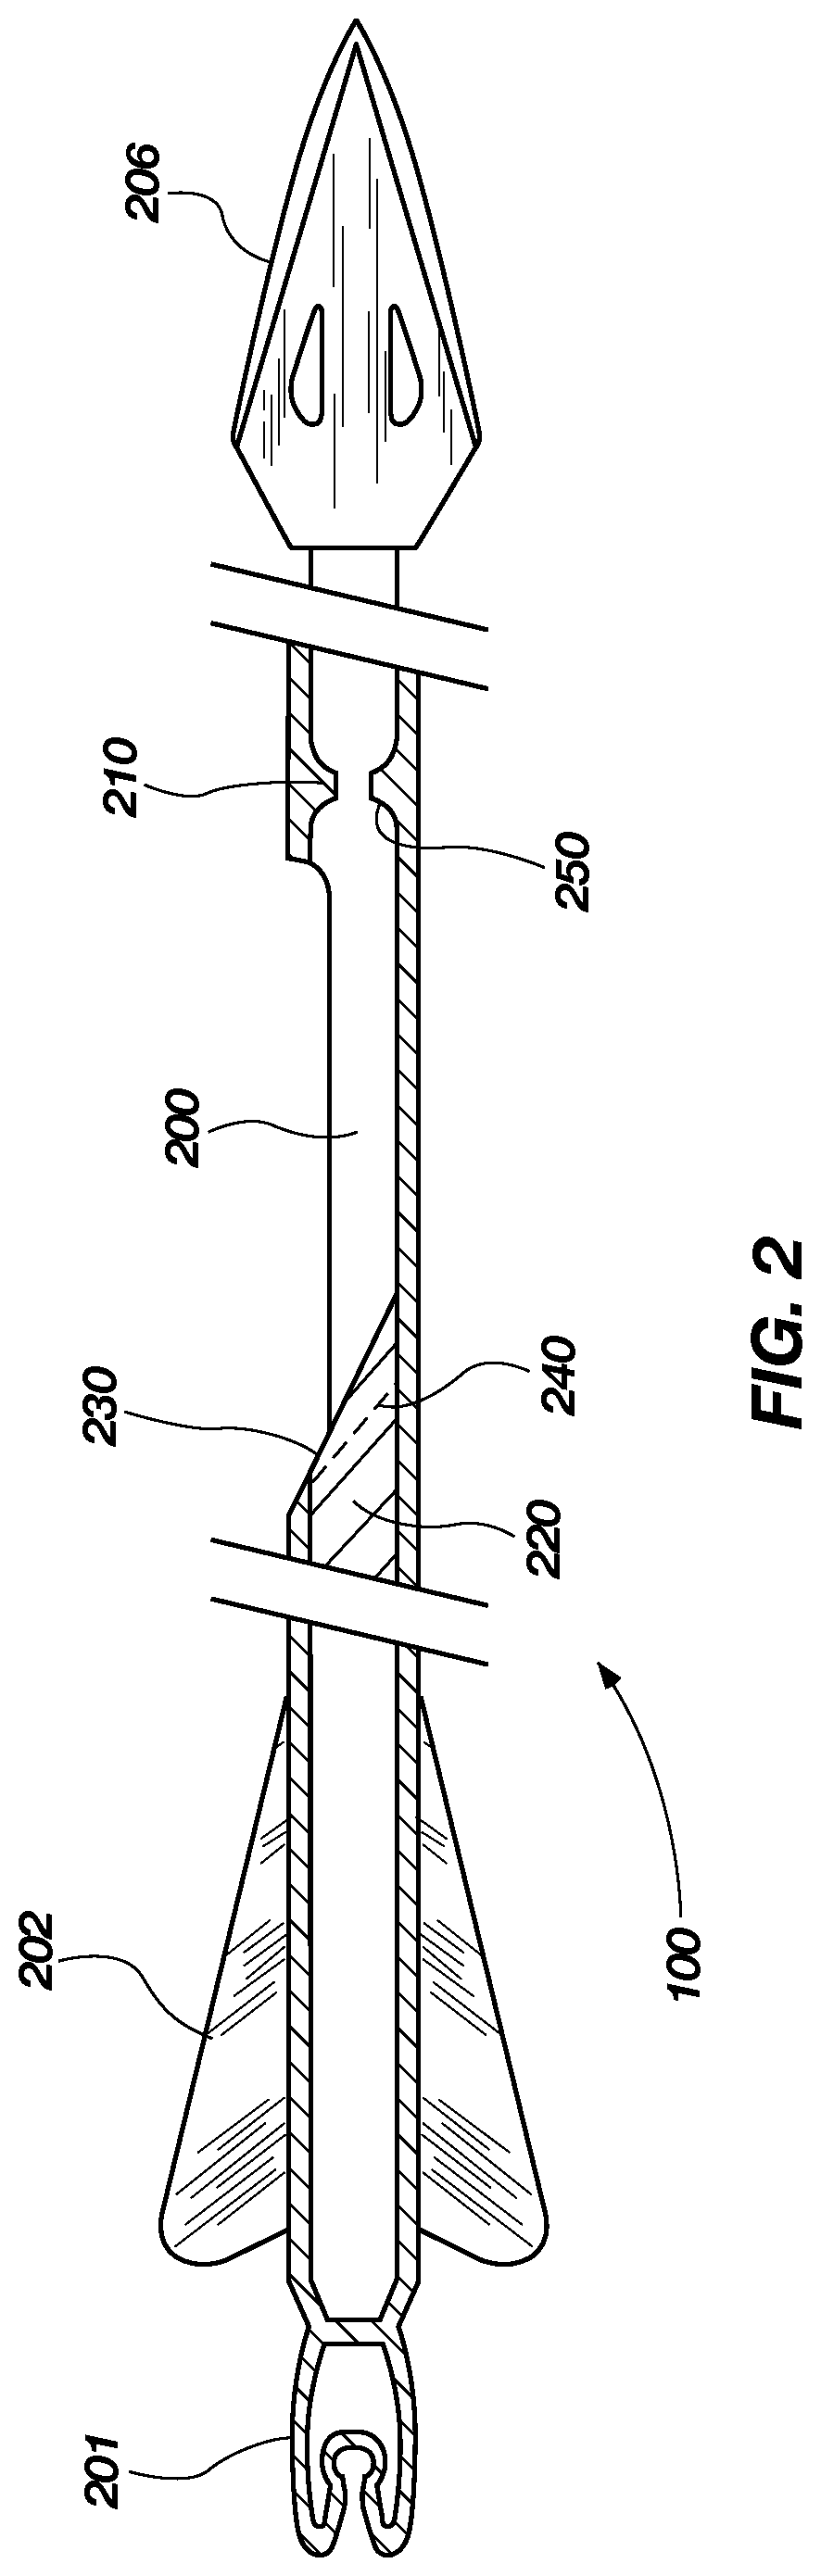 System and method for adjusting the trajectory of an arrow